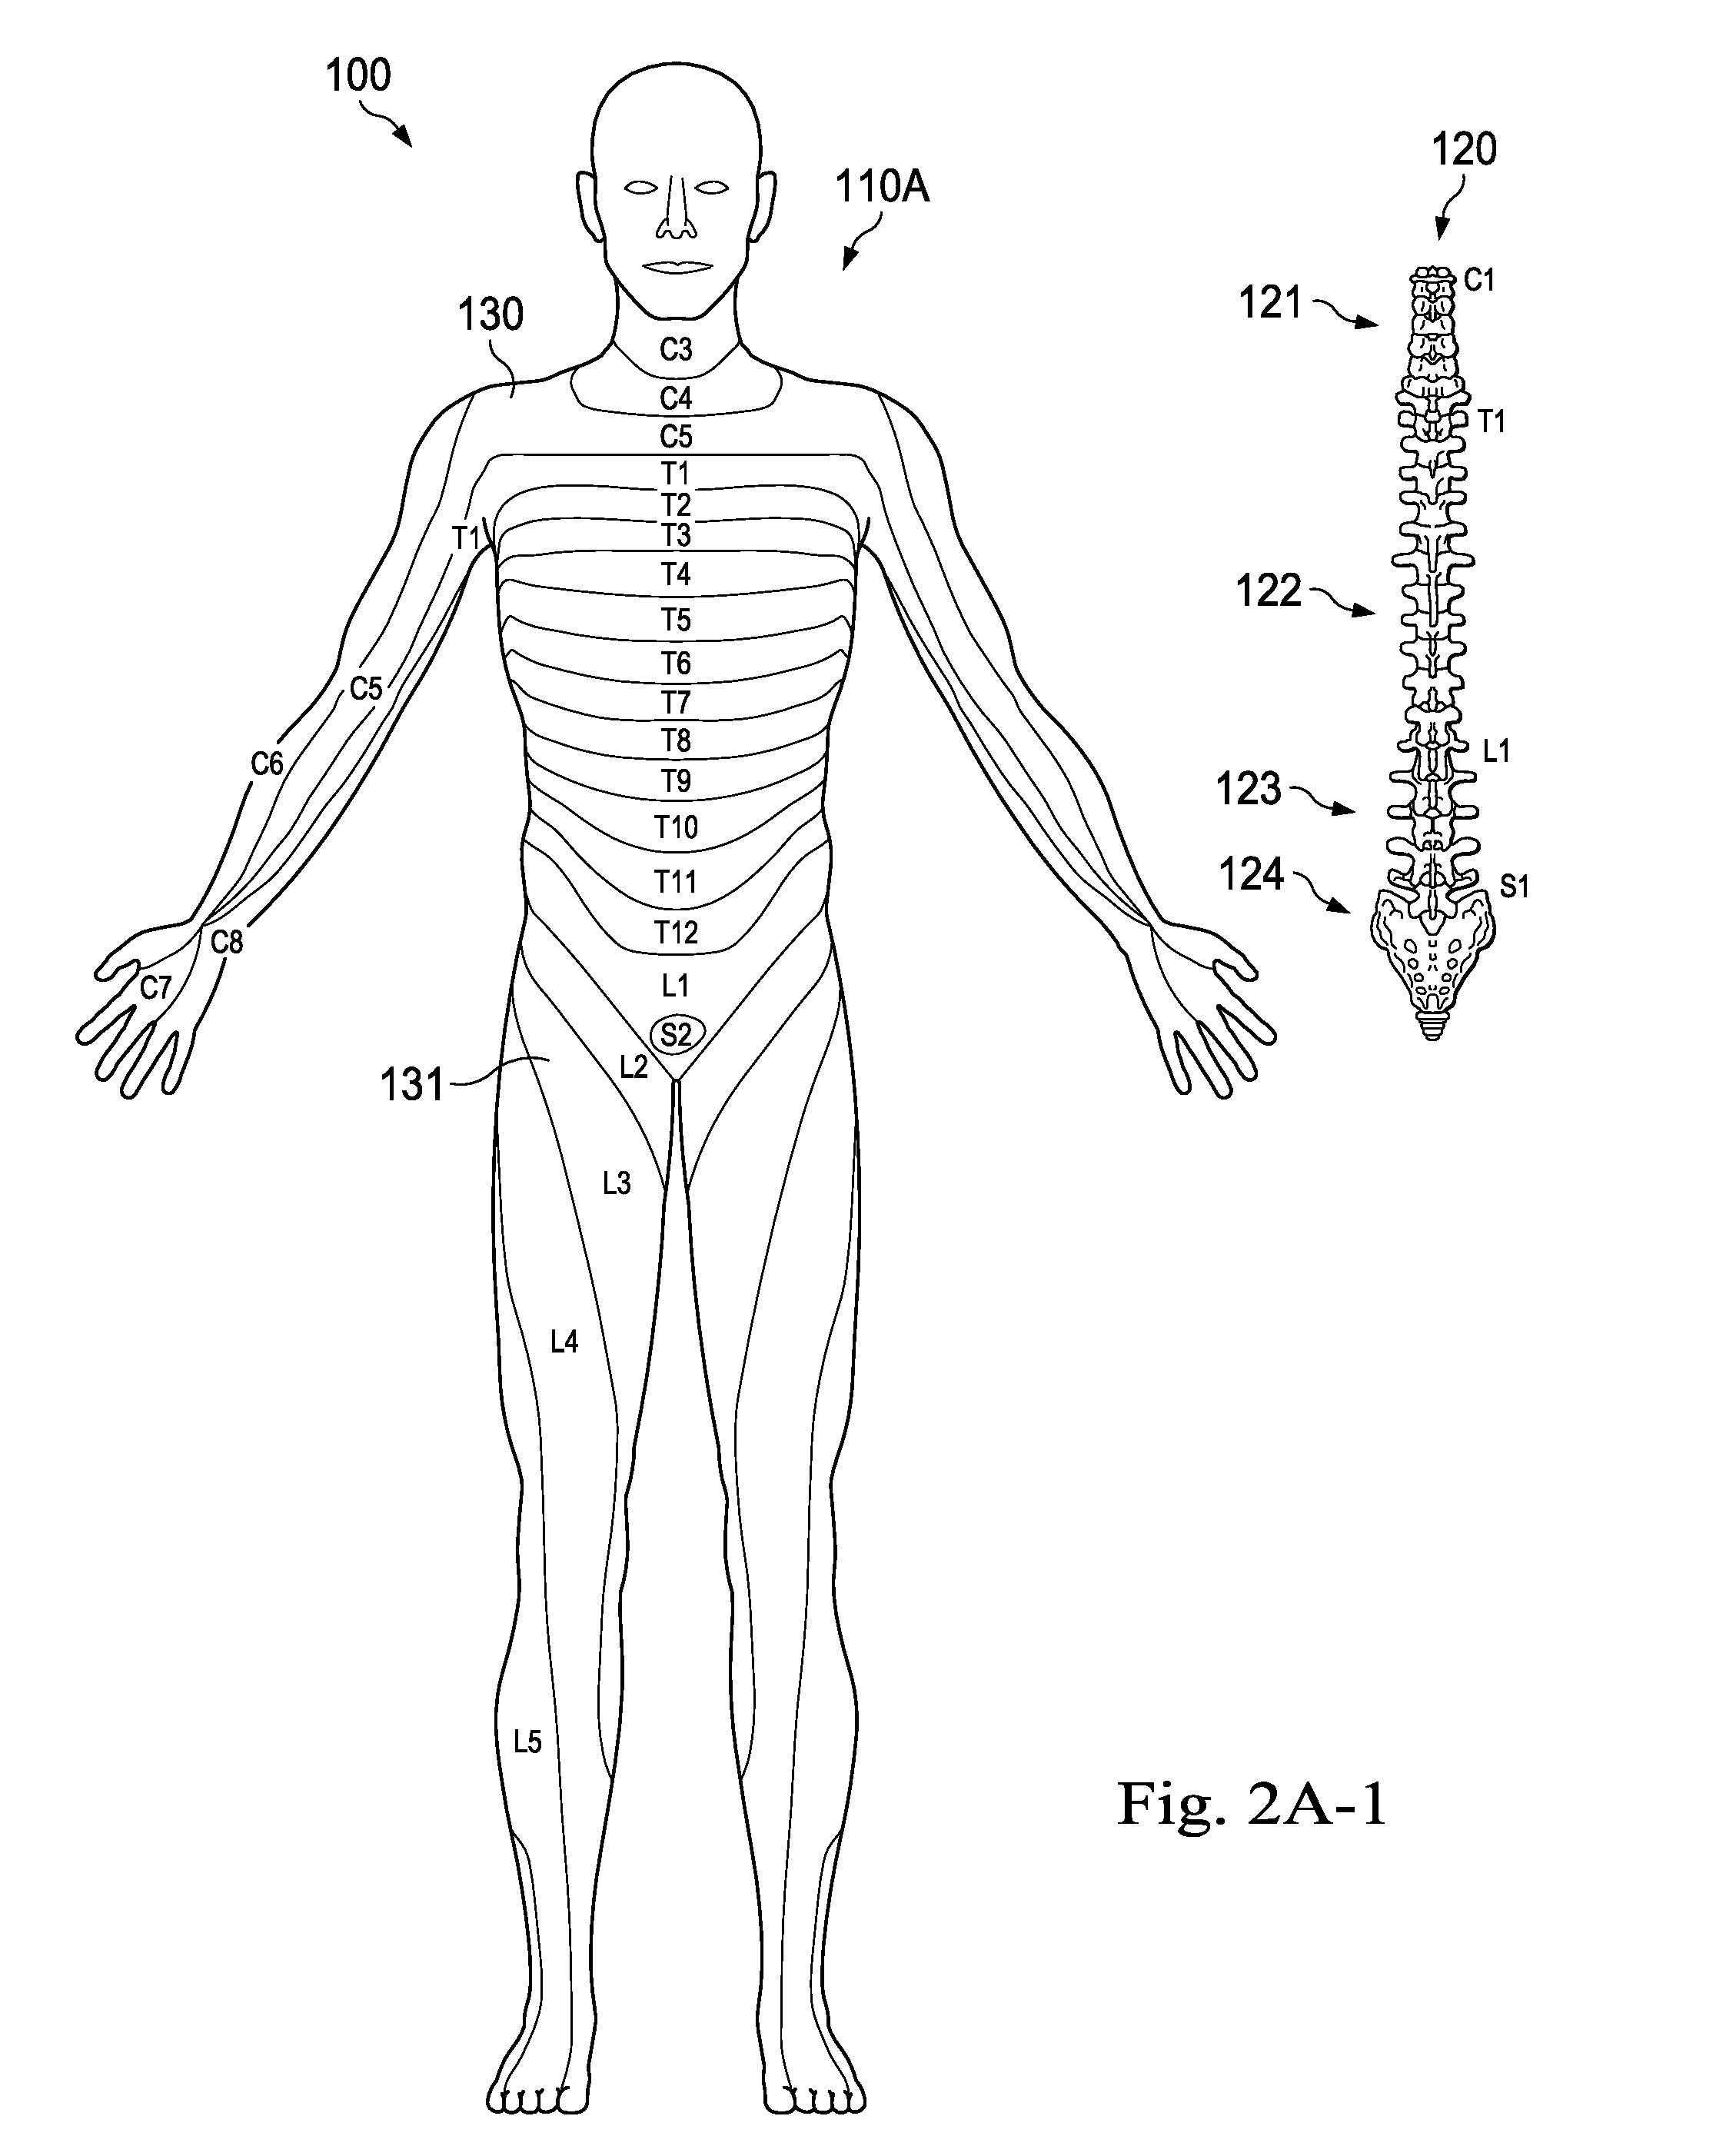 Method and System of Suggesting Spinal Cord Stimulation Region Based on Pain and Stimulation Maps with a Clinician Programmer